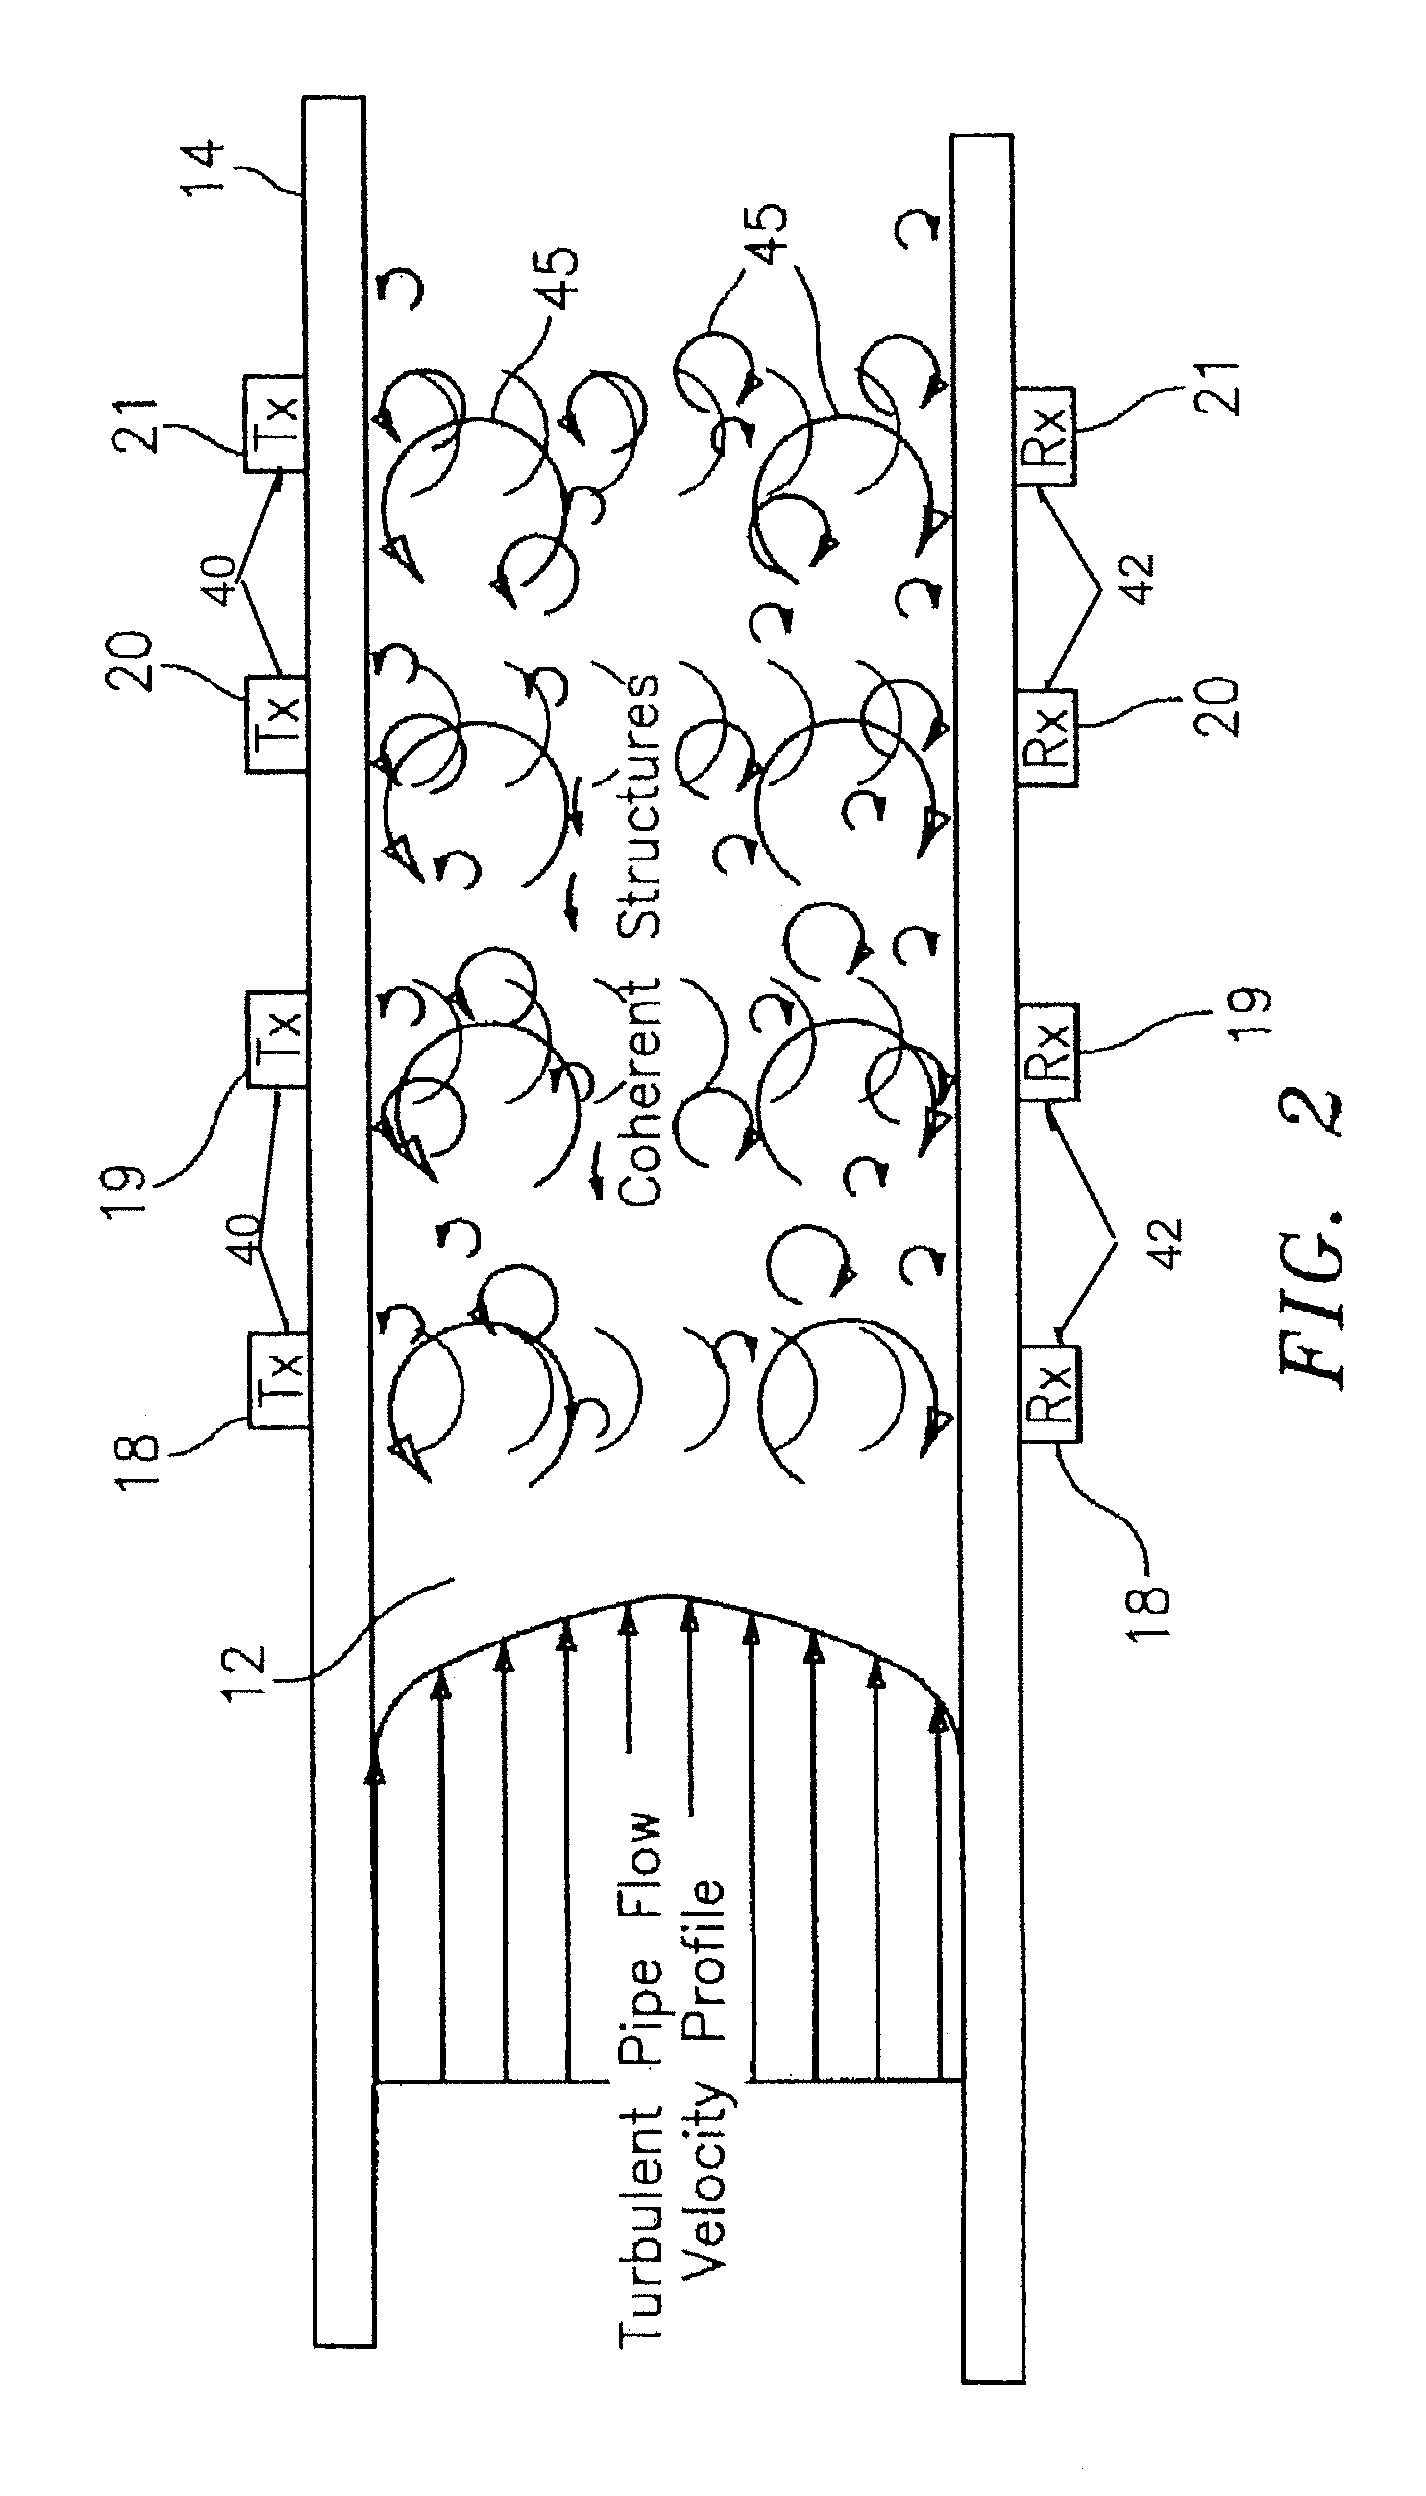 Apparatus and method of lensing an ultrasonic beam for an ultrasonic flow meter